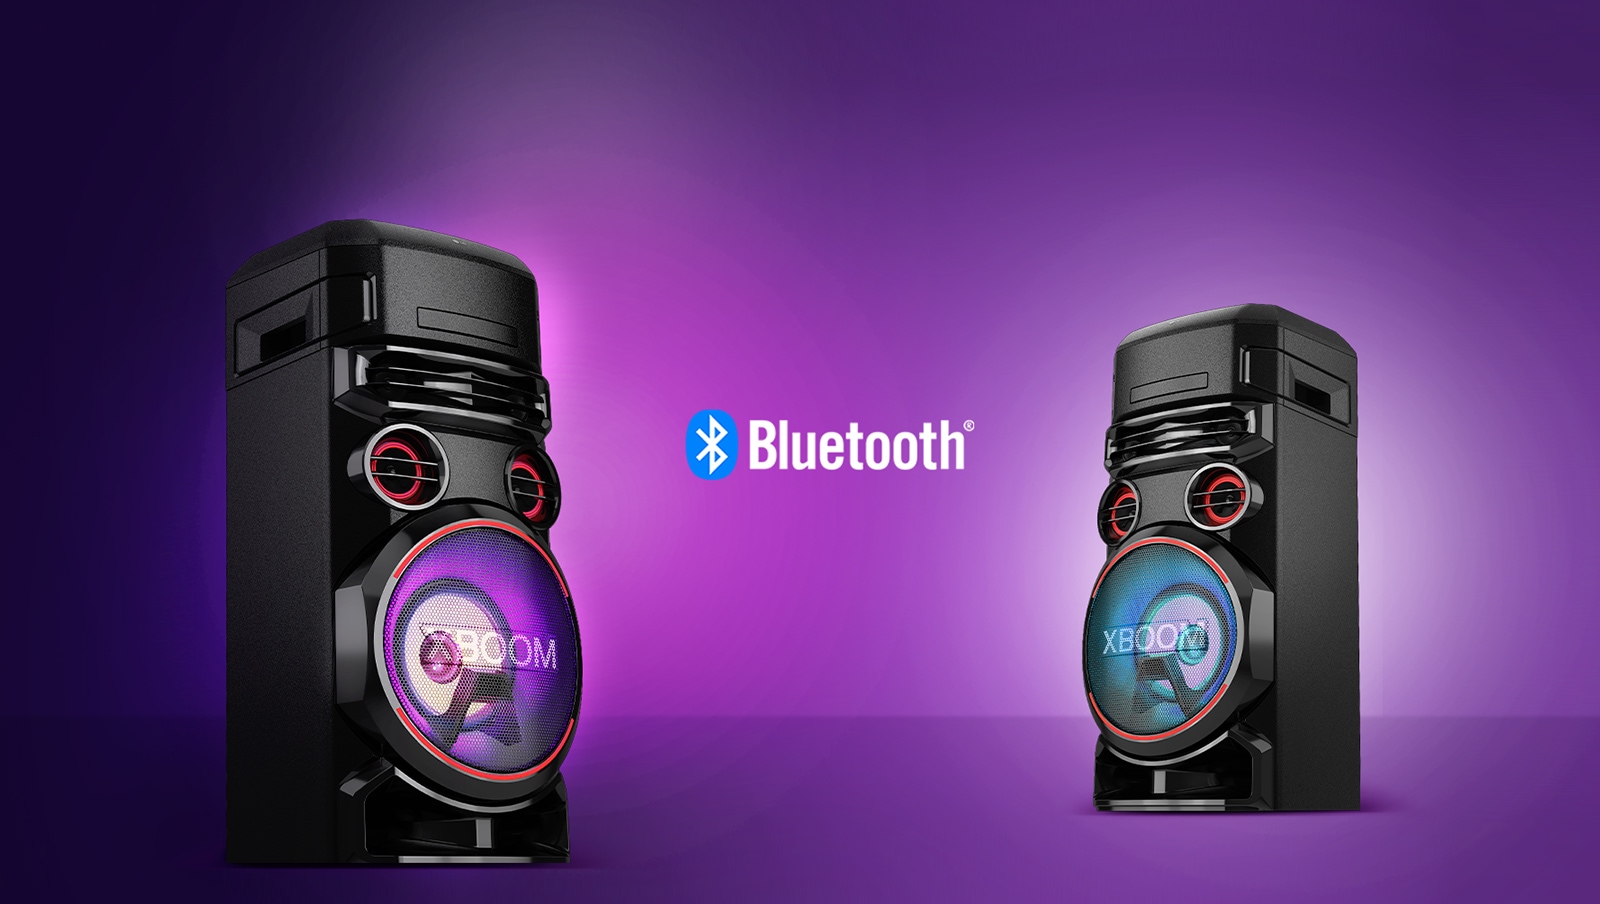 Two LG XBOOMs facing each other at diagonal angles against a purple background with a Bluetooth logo in between.